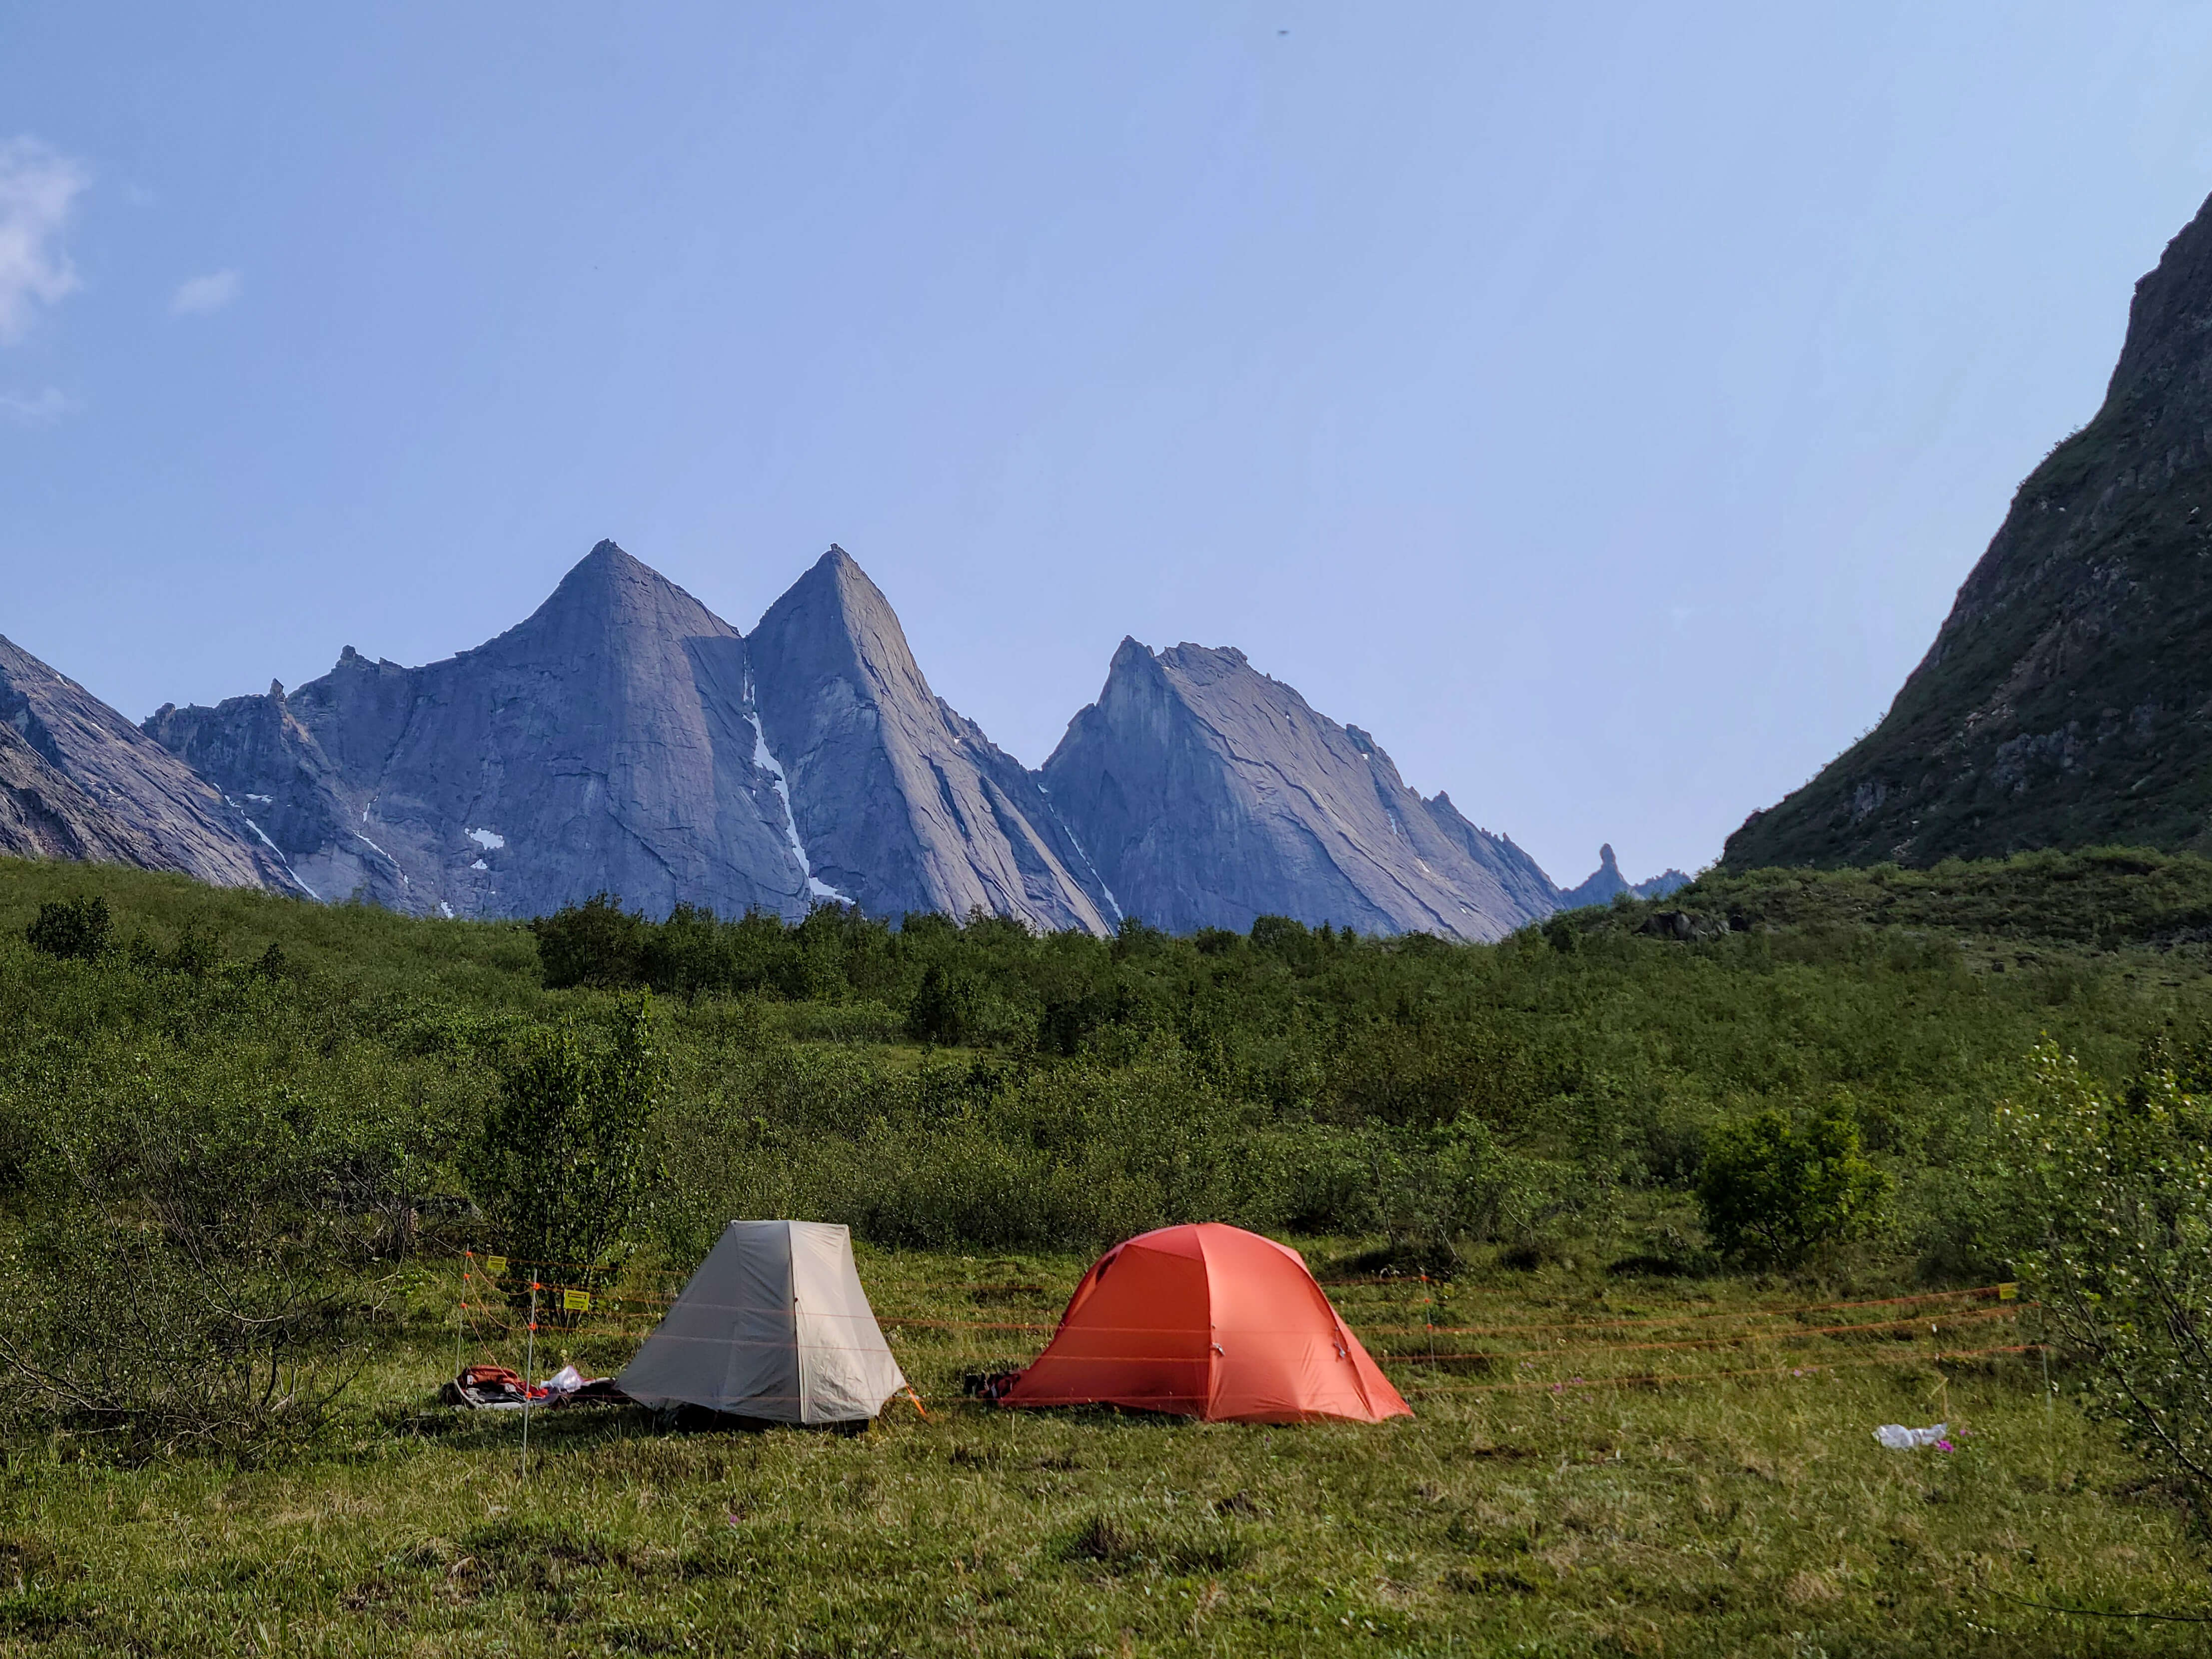 Bearwatch Systems electric bear fence set up around camping tents in Alaska